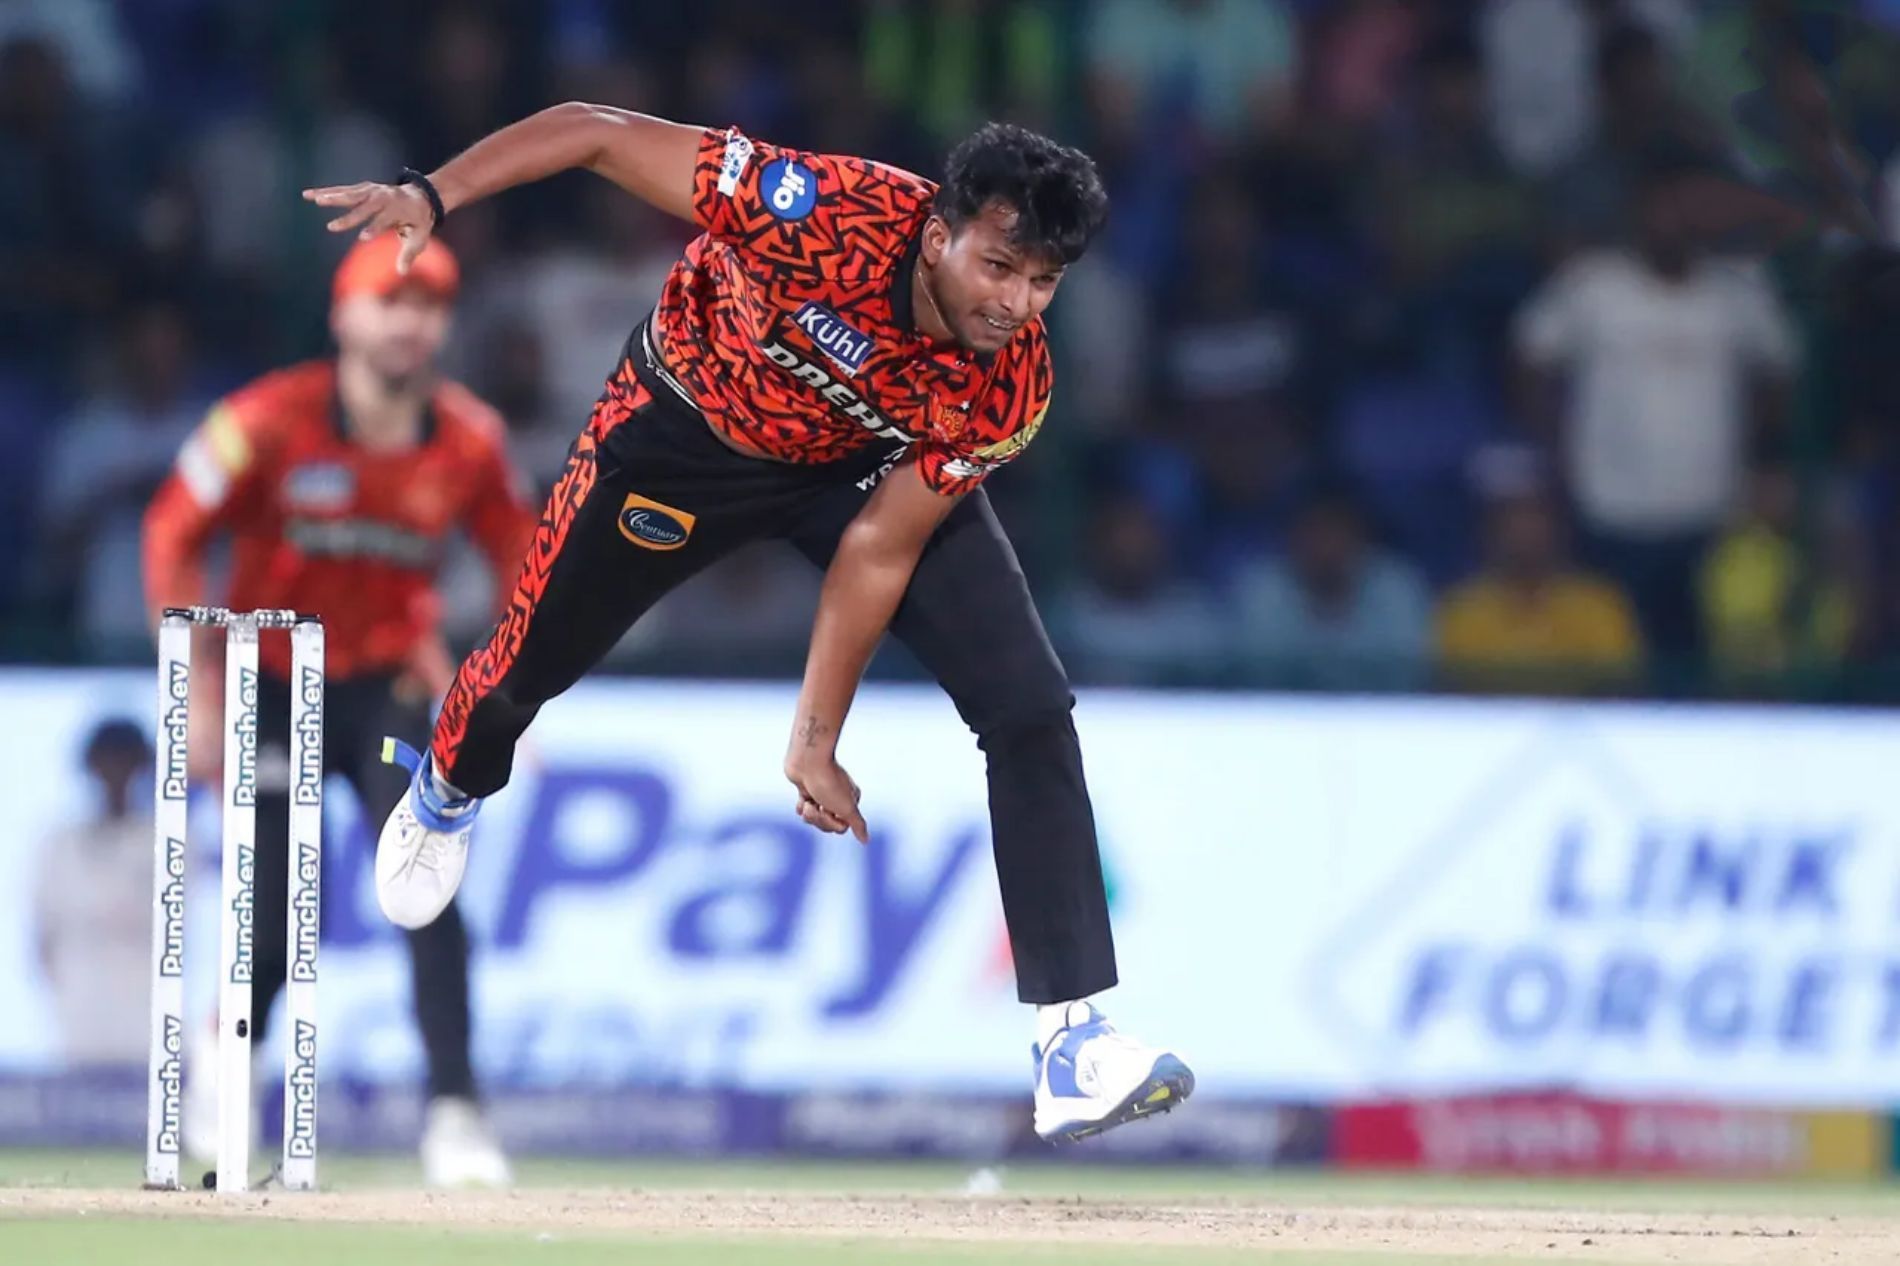 T Natarajan has been in fine form with the ball for Sunrisers Hyderabad. (Pic: BCCI/ iplt20.com)